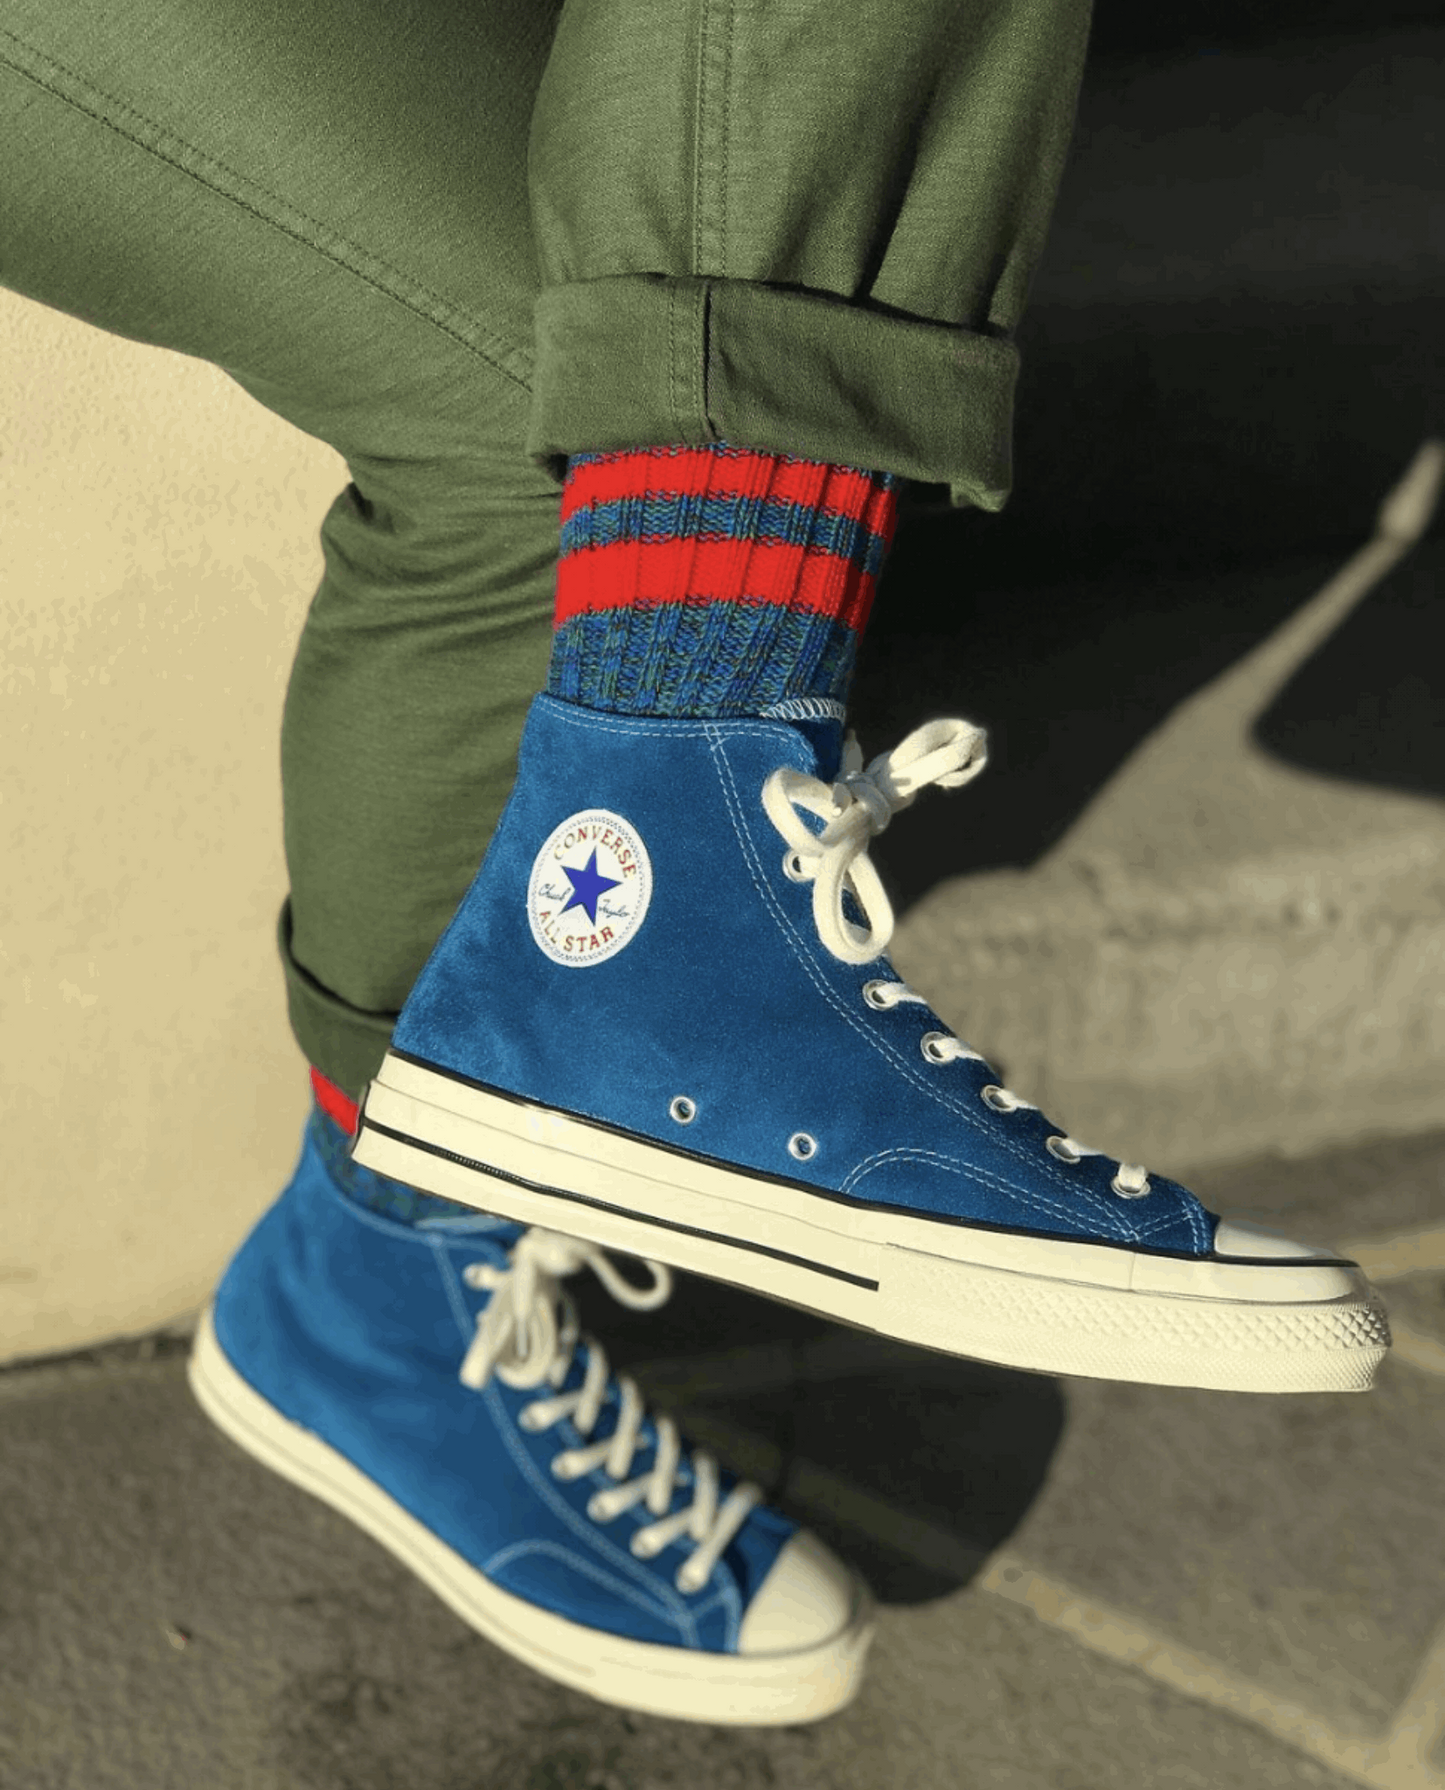 Converse with teal color knitted sock